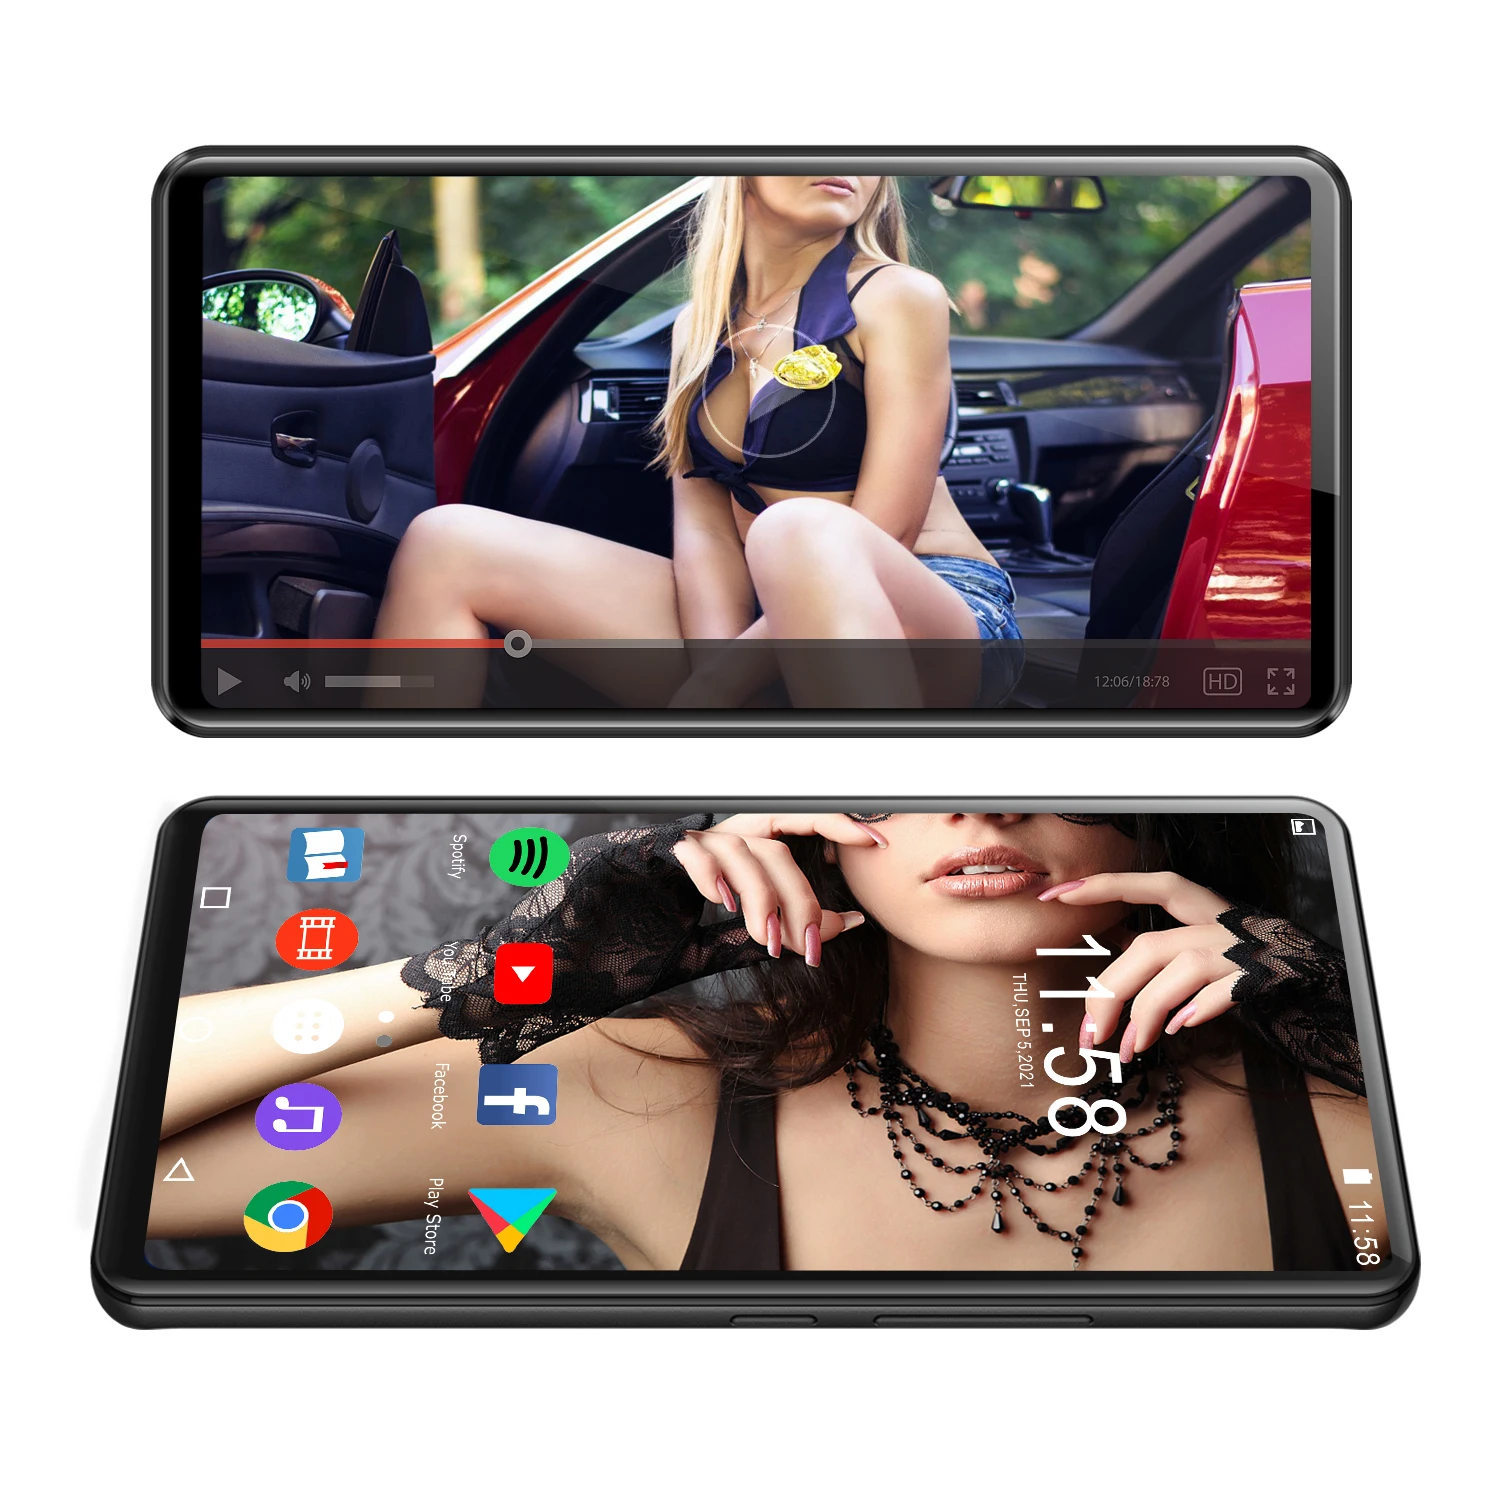 

S21 Bt Touch screen 6 inches BT WIFI Android home office recreation new movie free download sexy videos mp3 mp4 player, Gray/customize